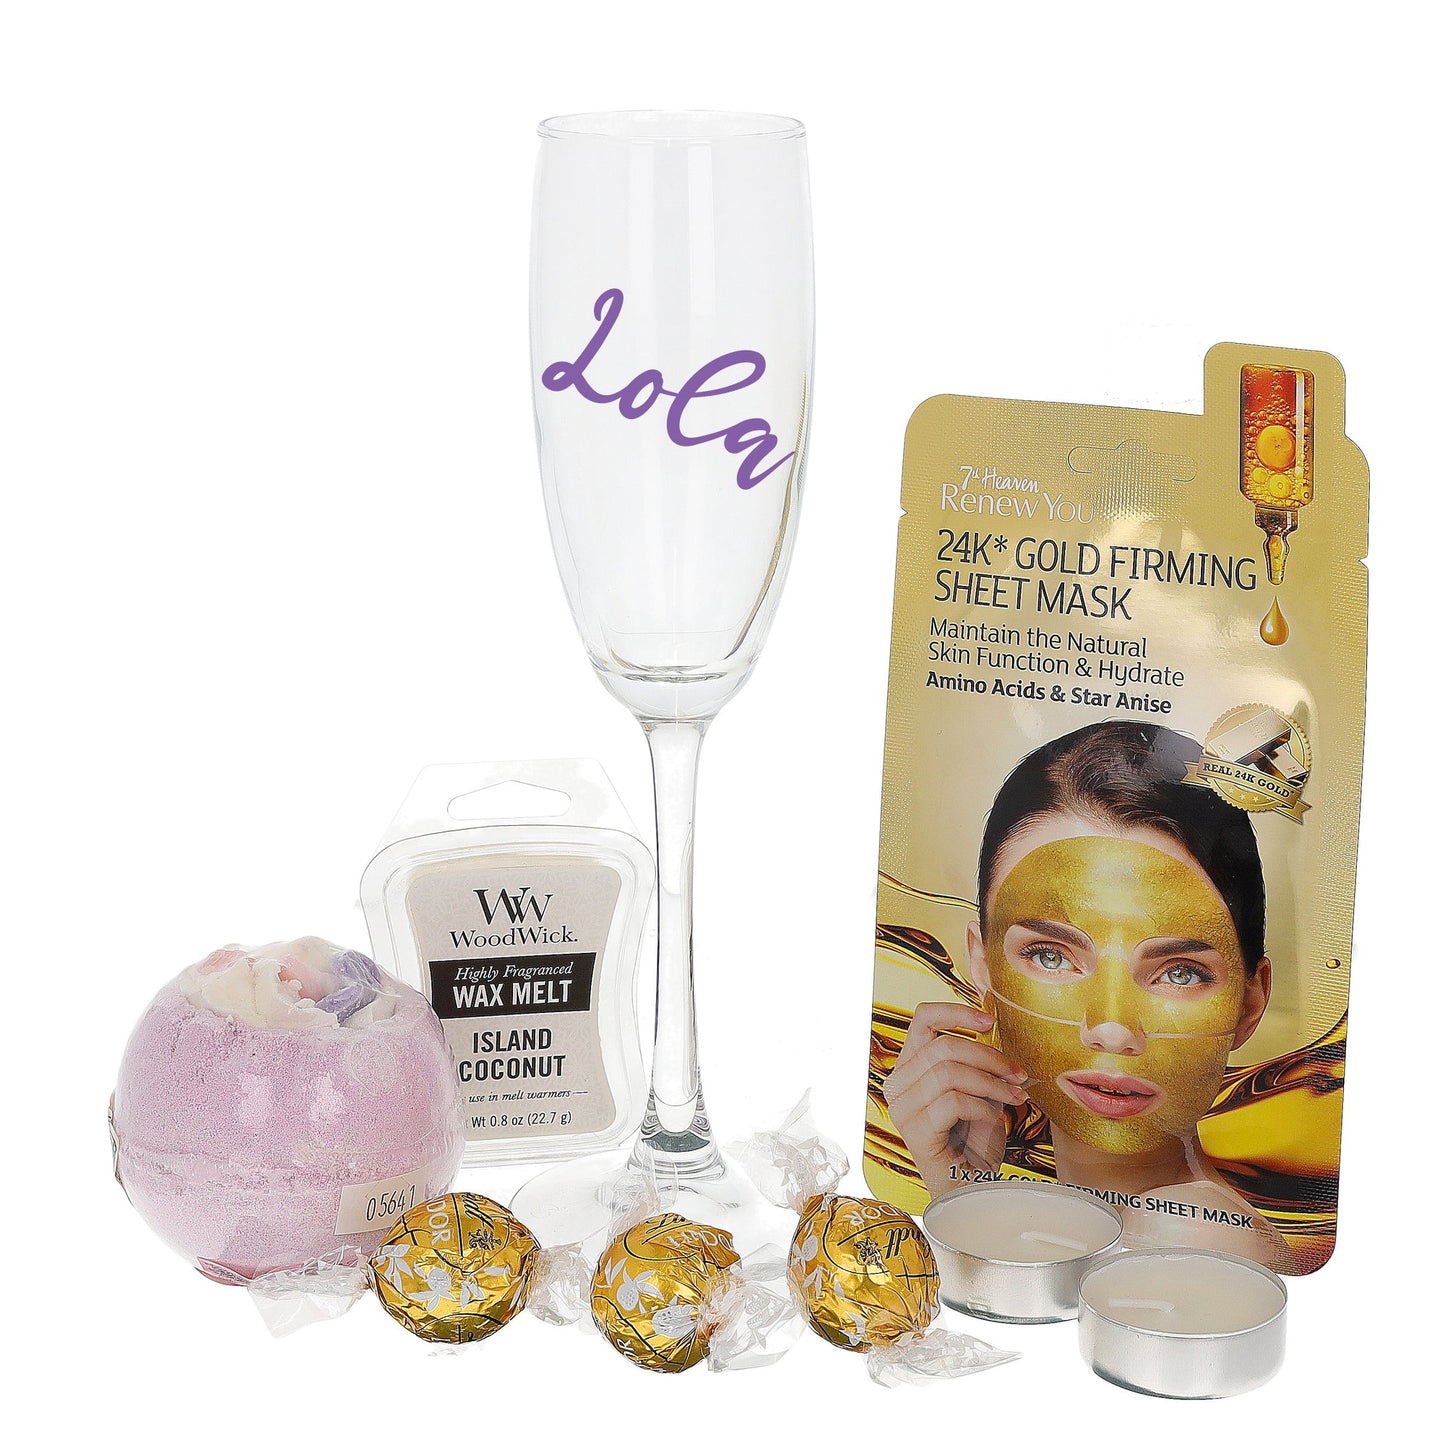 Happy Birthday Personalised Prosecco / Champagne Glass Filled with Spa Pamper Gifts  - Always Looking Good -   